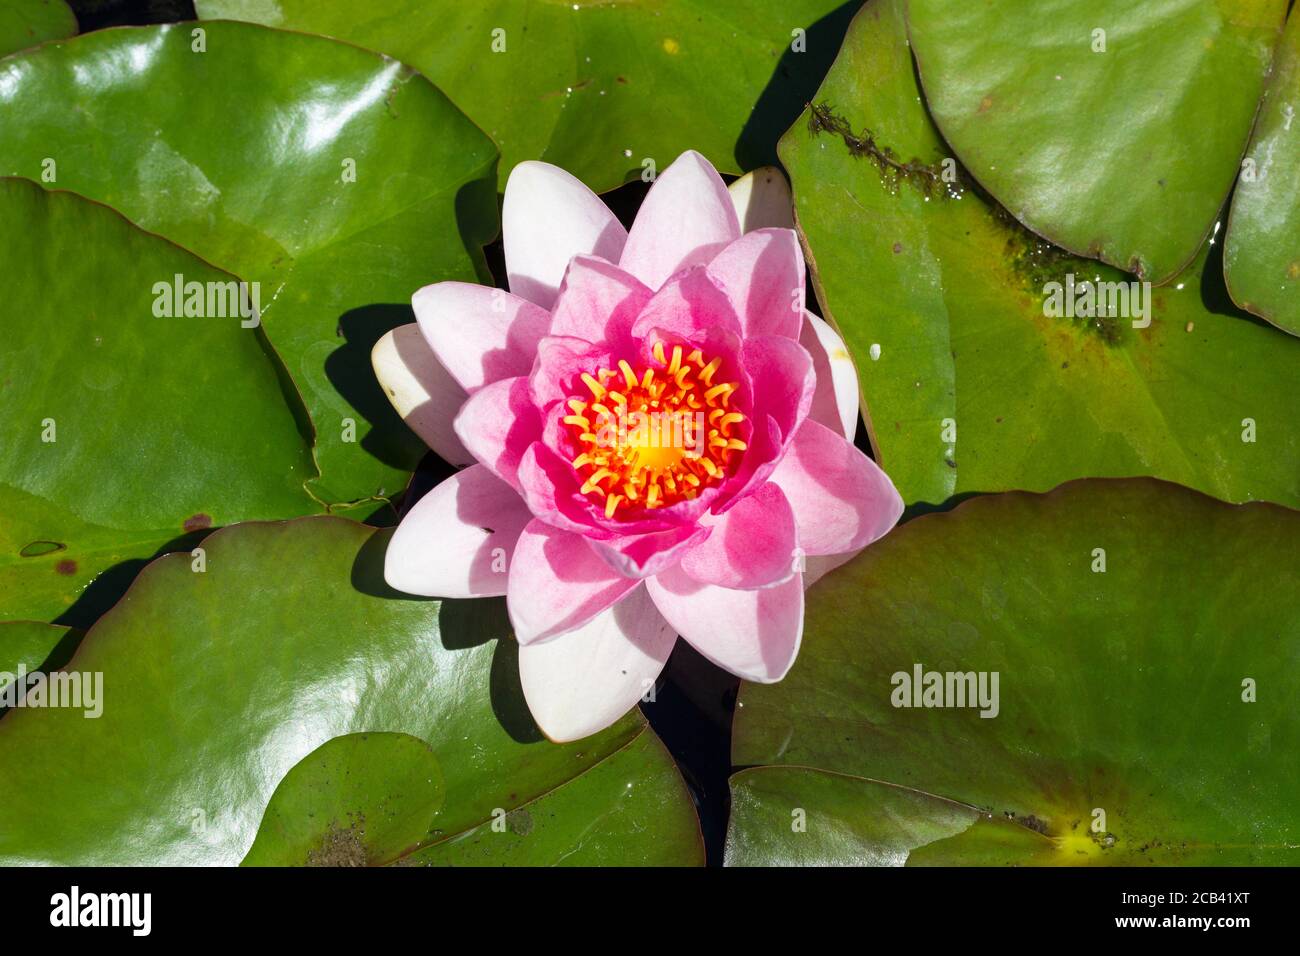 Top down view on water lily ymphaea hybride Charles de Meurville. Pink petals, yellow center. With green leaves around the flower. Stock Photo